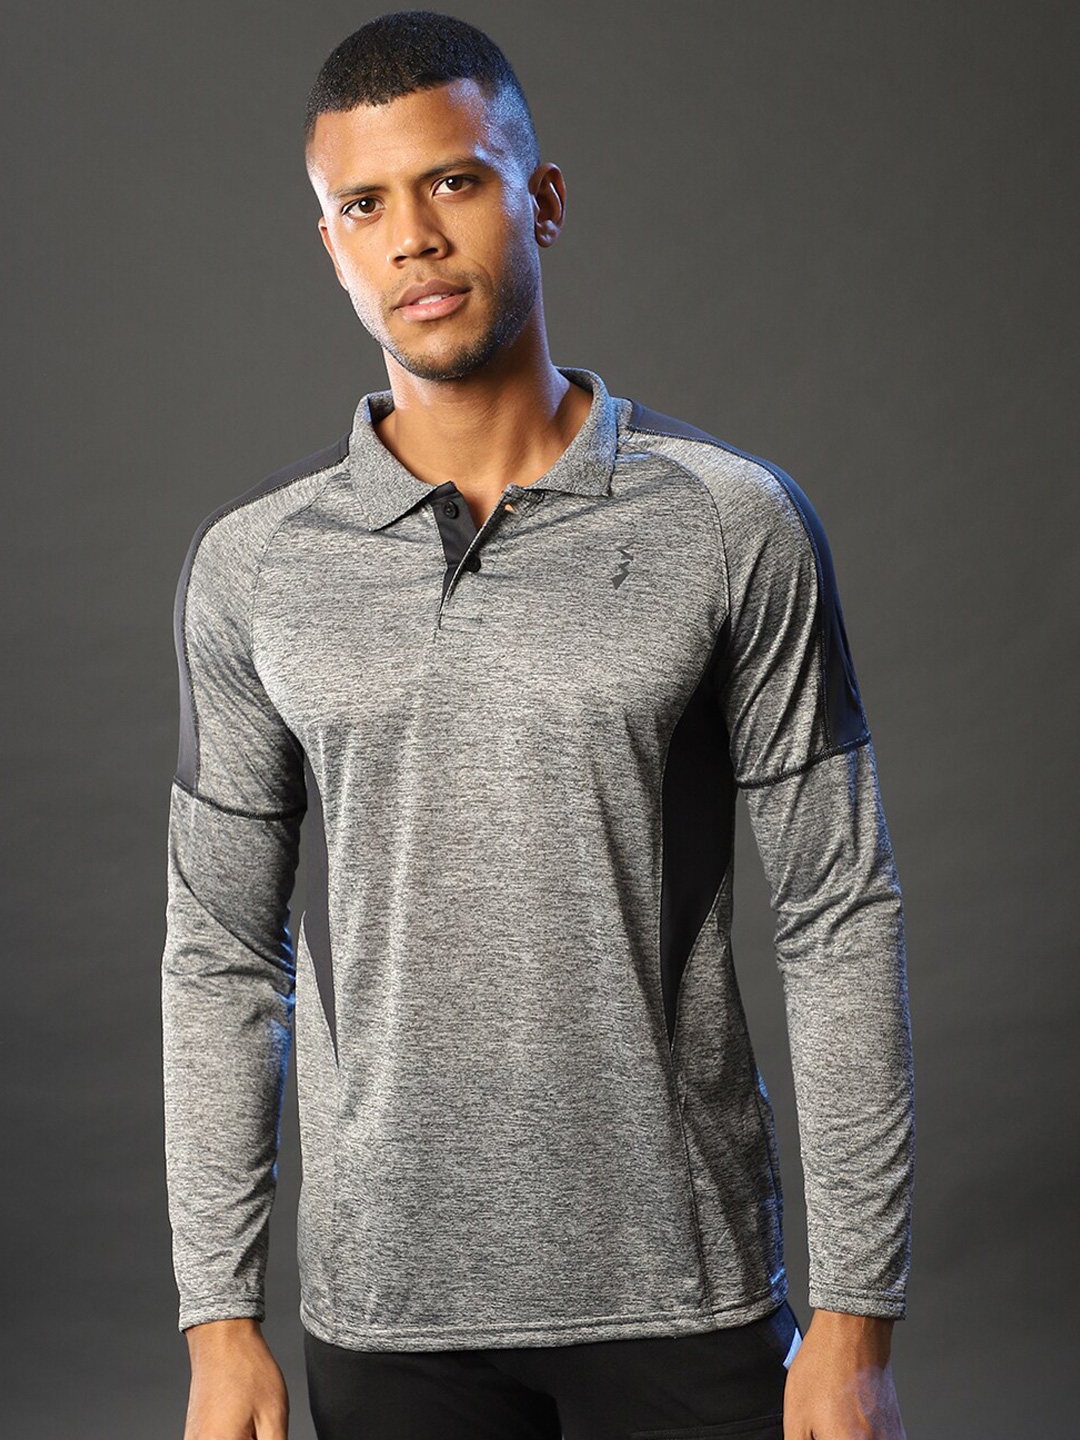 Campus Sutra Men's Solid Grey Dri-Fit Full Sleeve Activewear T